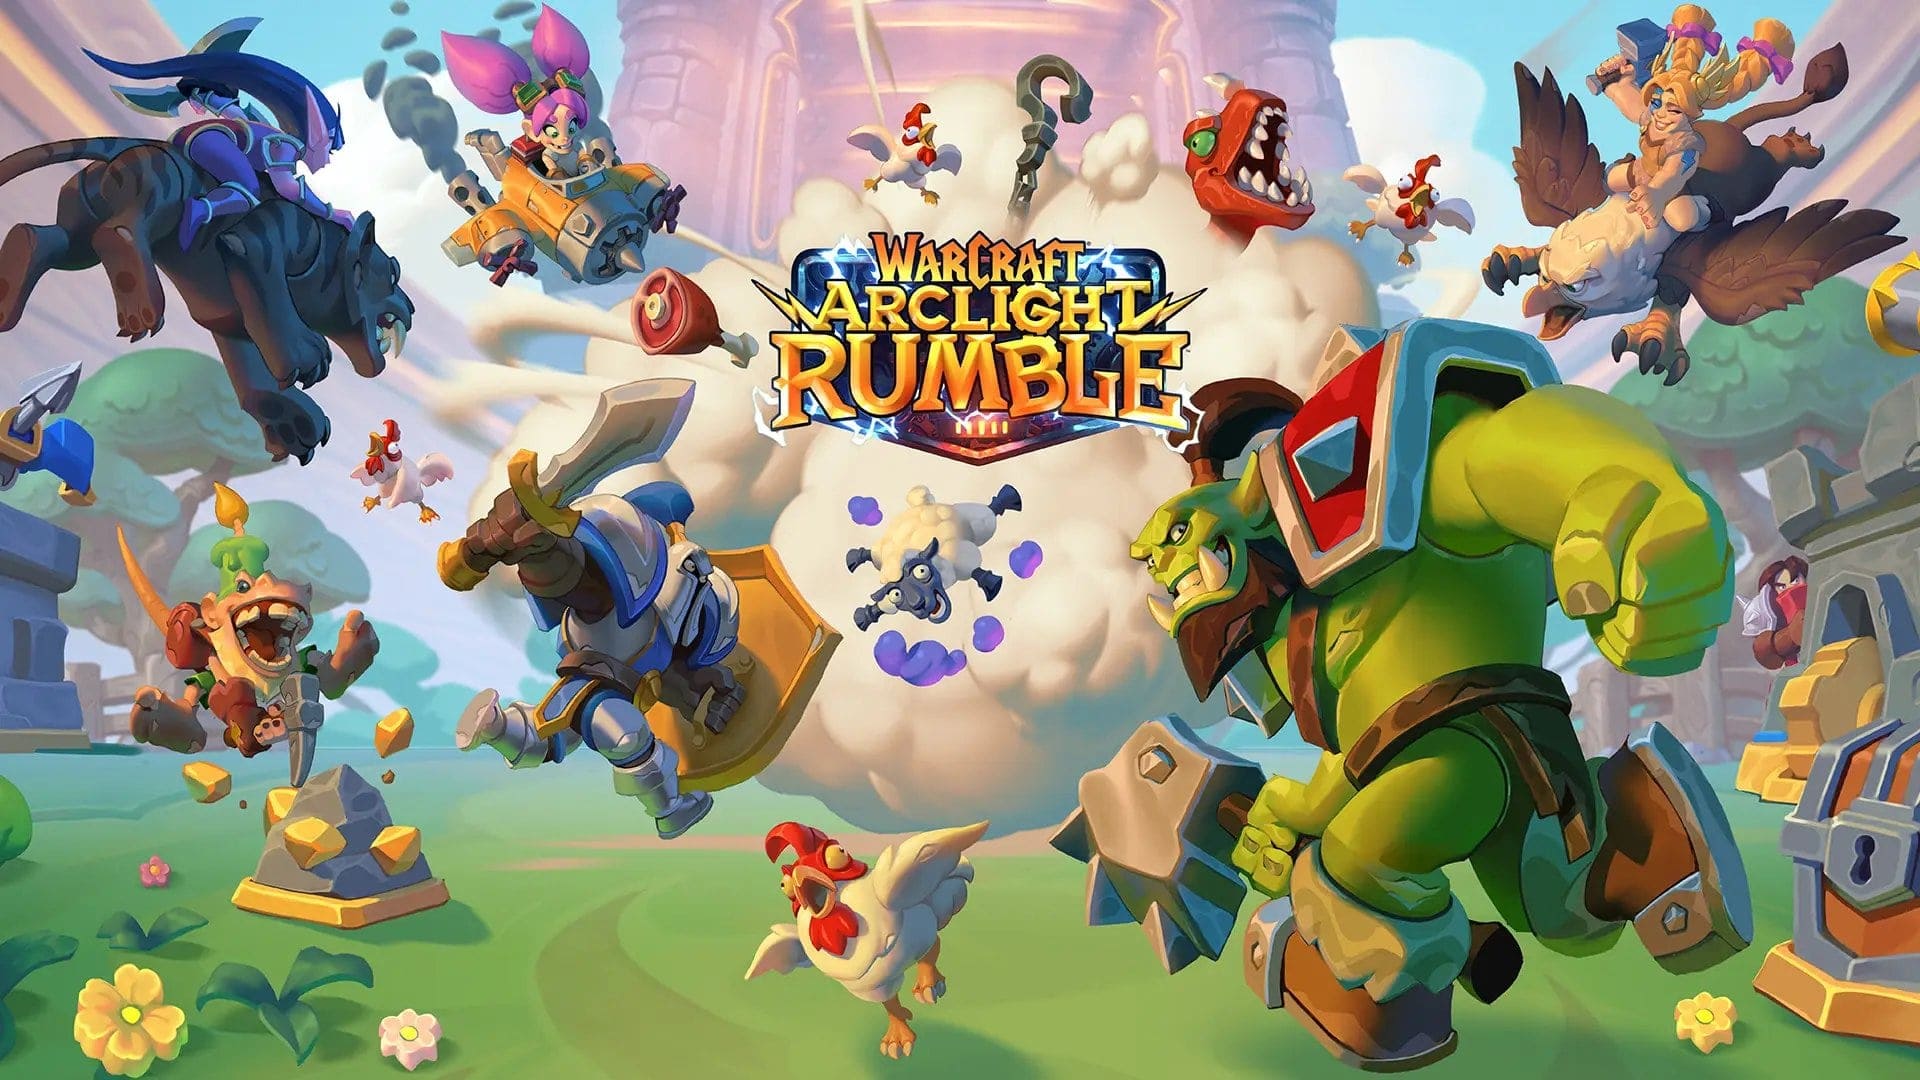 Blizzard reveals new mobile game: Warcraft Arclight Rumble